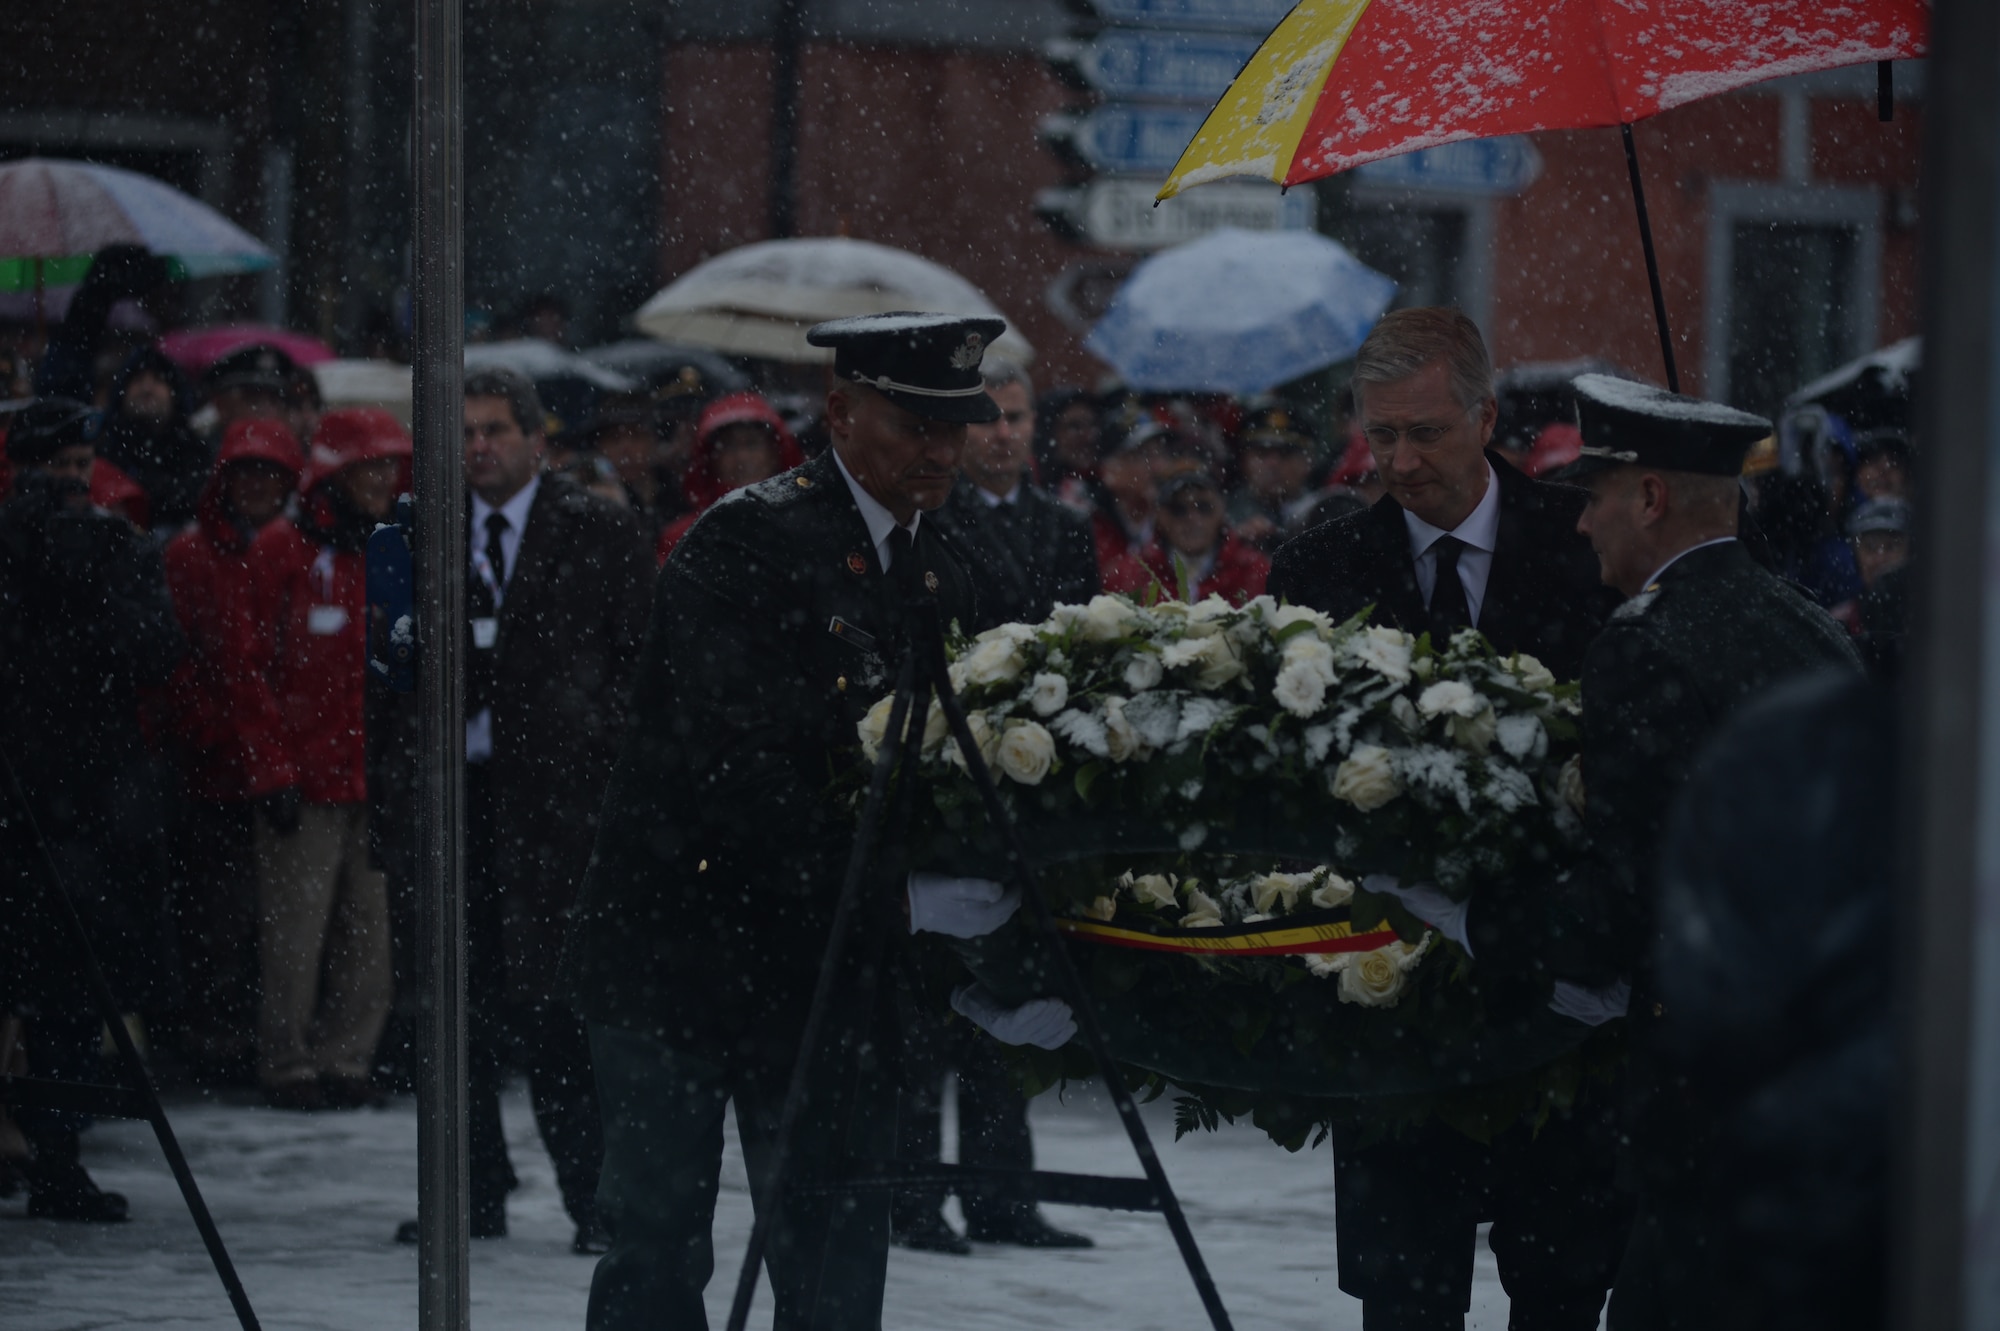 Belgian King Philippe lays a wreath aided by Belgian Army soldiers at the statue of U.S. Army Brig. Gen. Anthony McAuliffe, during a ceremony in Bastogne, Belgium, Dec. 13, 2014. More than 40,000 American and European citizens honored the service and legacy of more than 40 surviving World War II veterans as part of a 70th anniversary celebration of the Battle of the Bulge. (U.S. Air Force photo by Staff Sgt. Joe W. McFadden/Released)